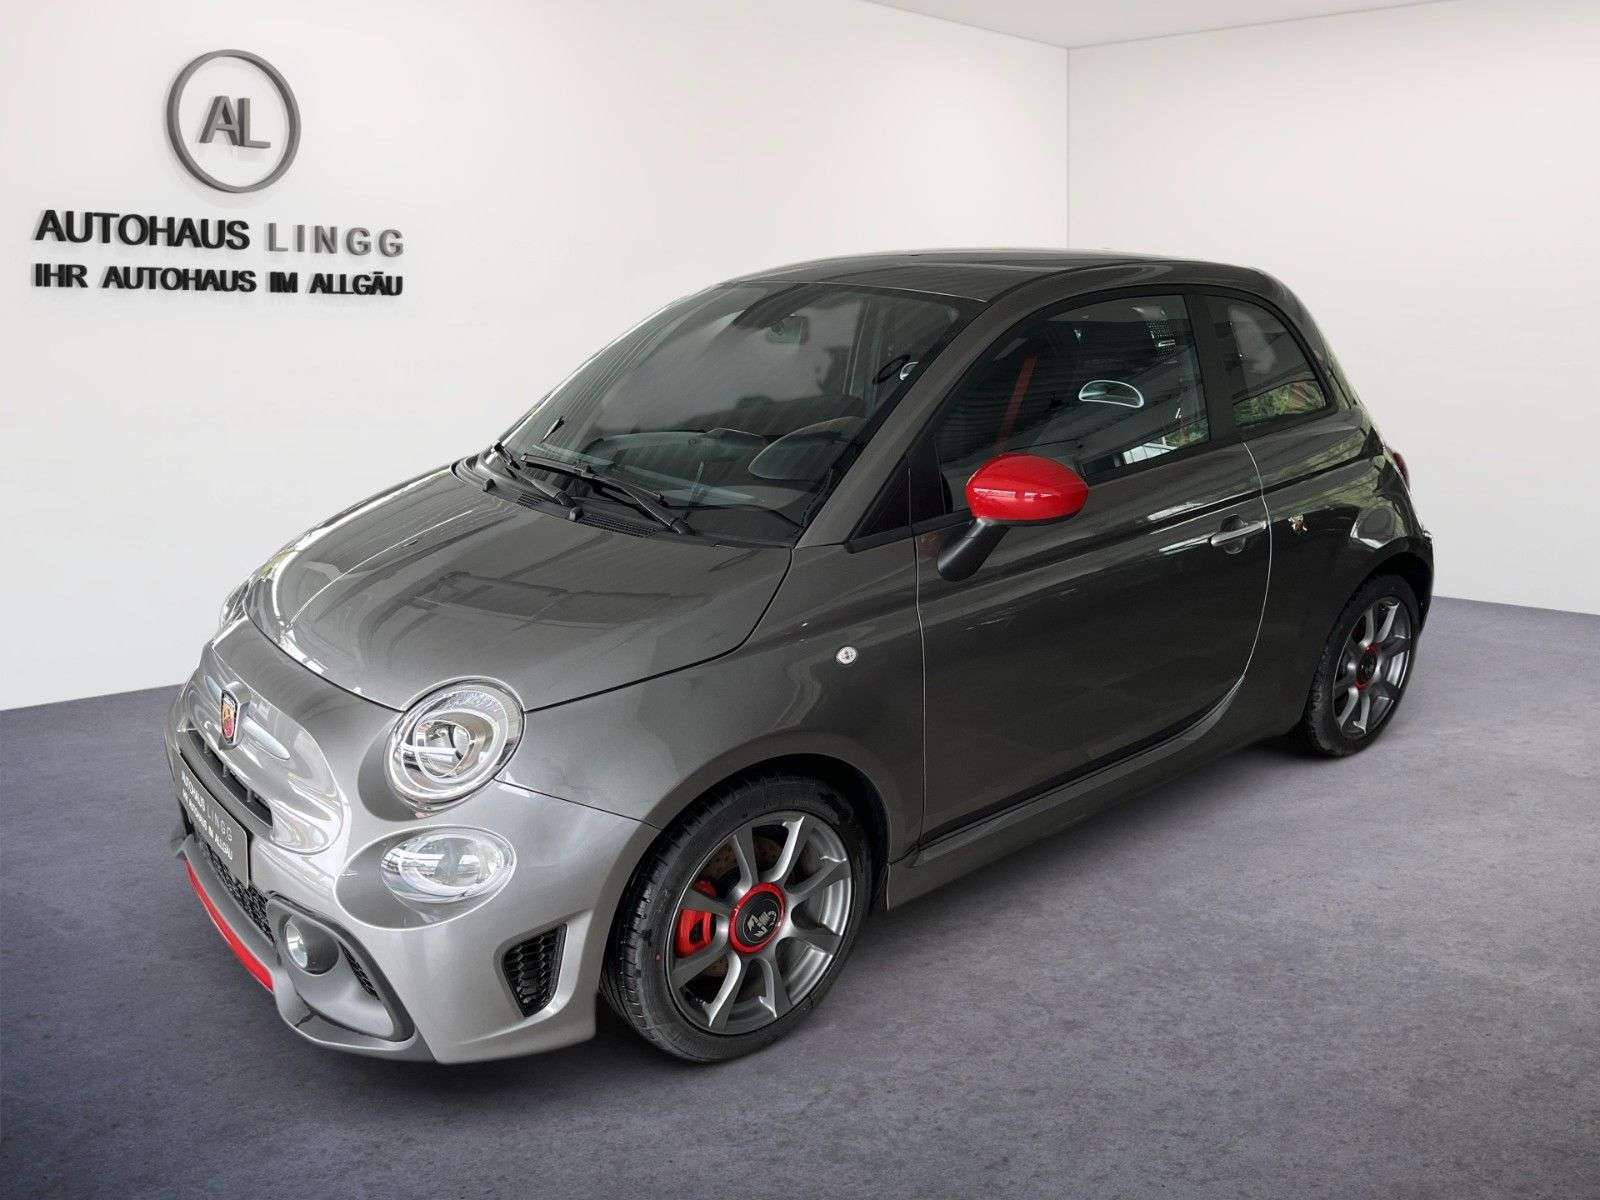 Abarth 595 Compact in Grey pre-registered in Lindenberg for € 27,990.-